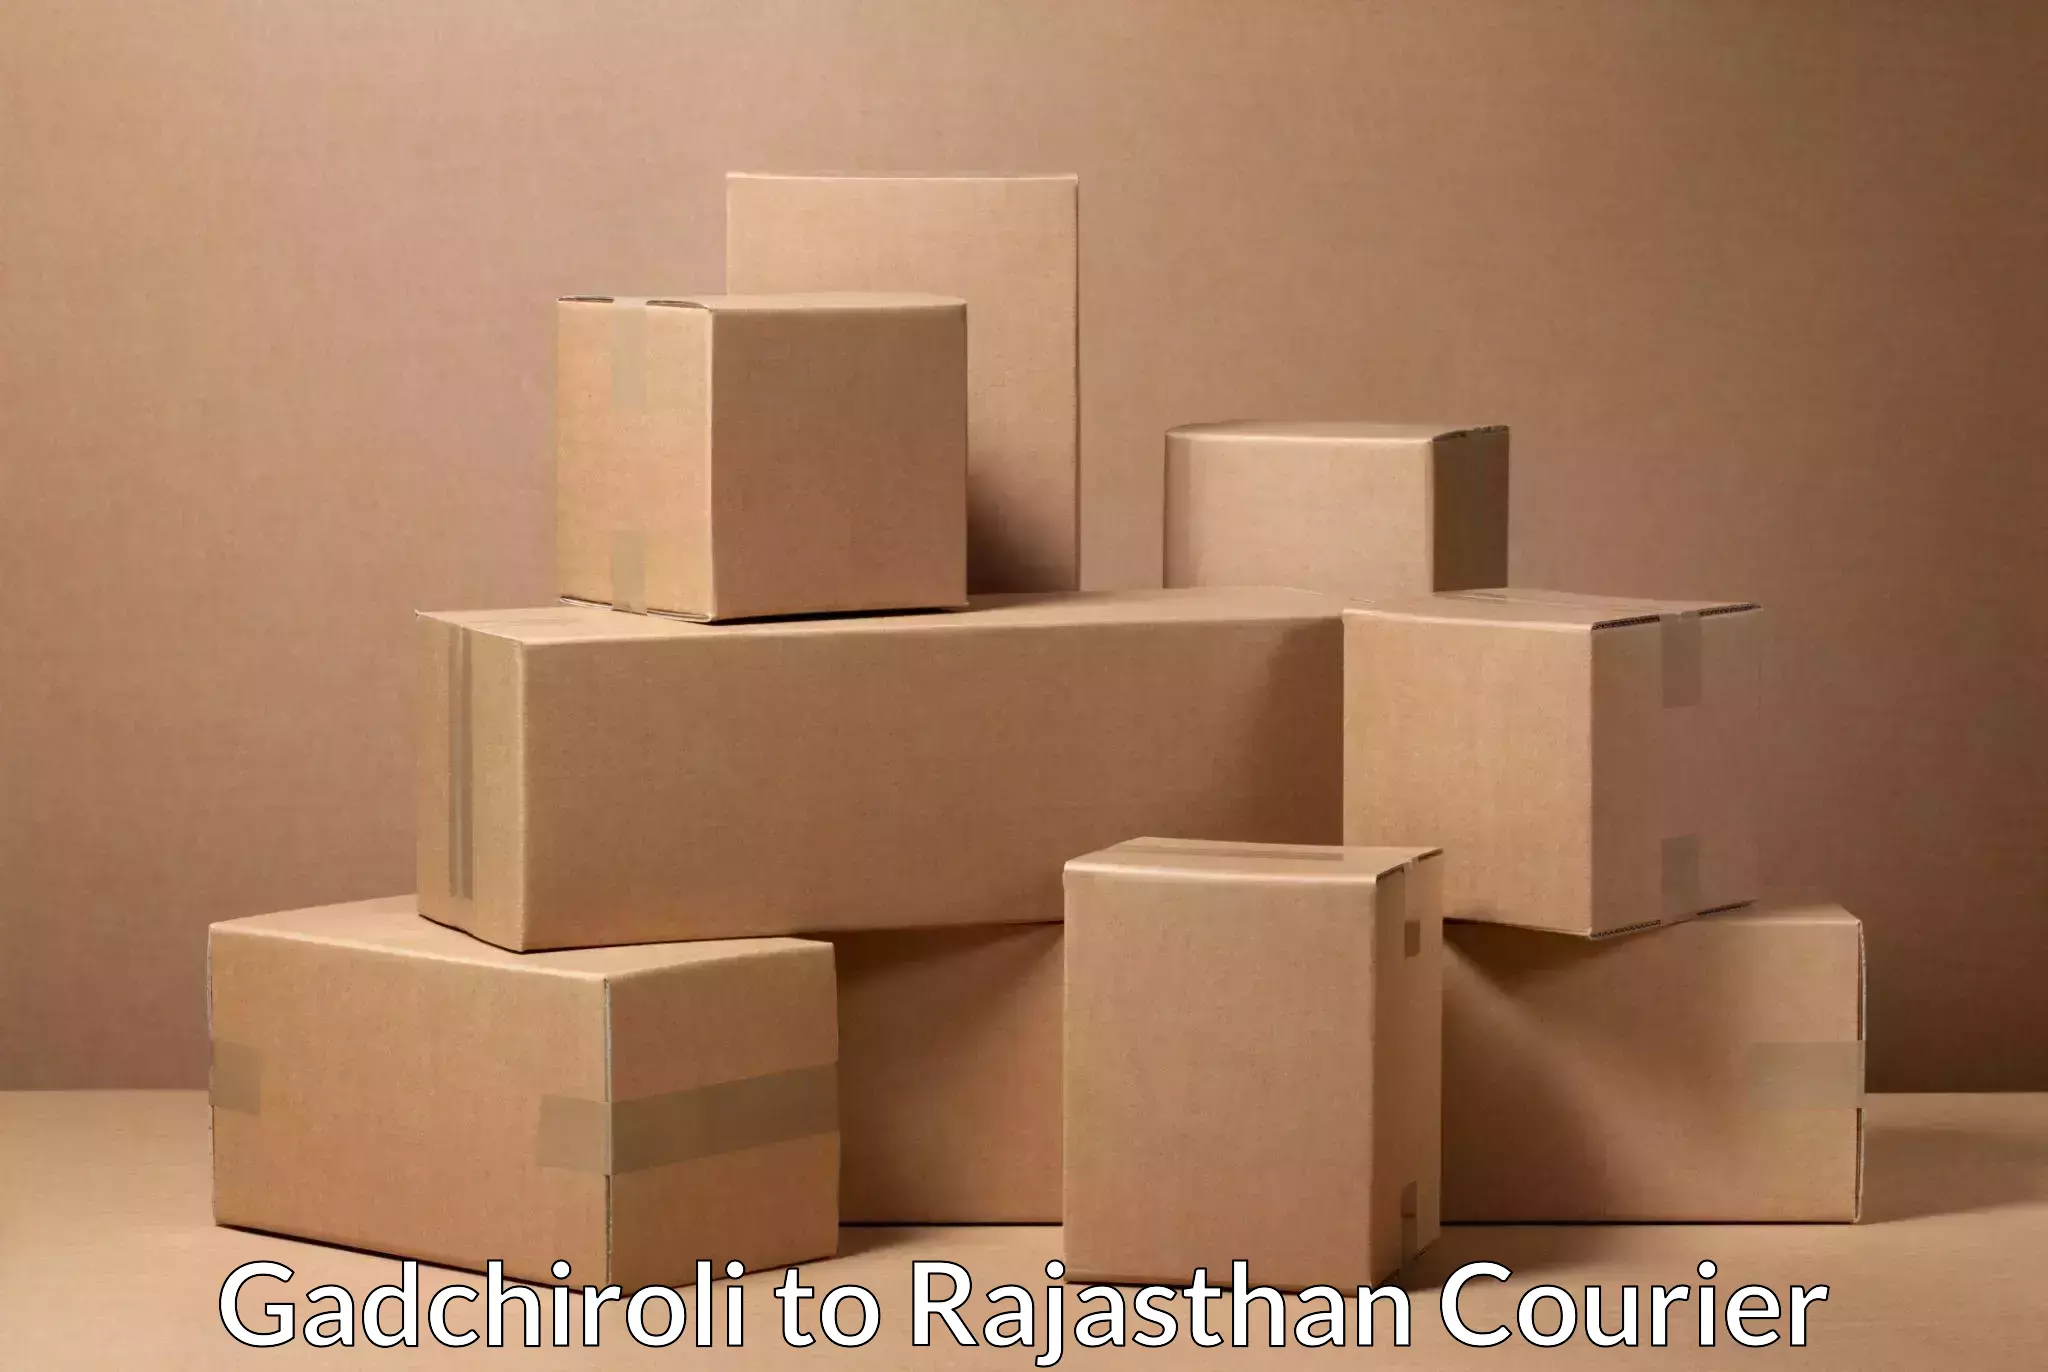 Professional courier services Gadchiroli to Sikar